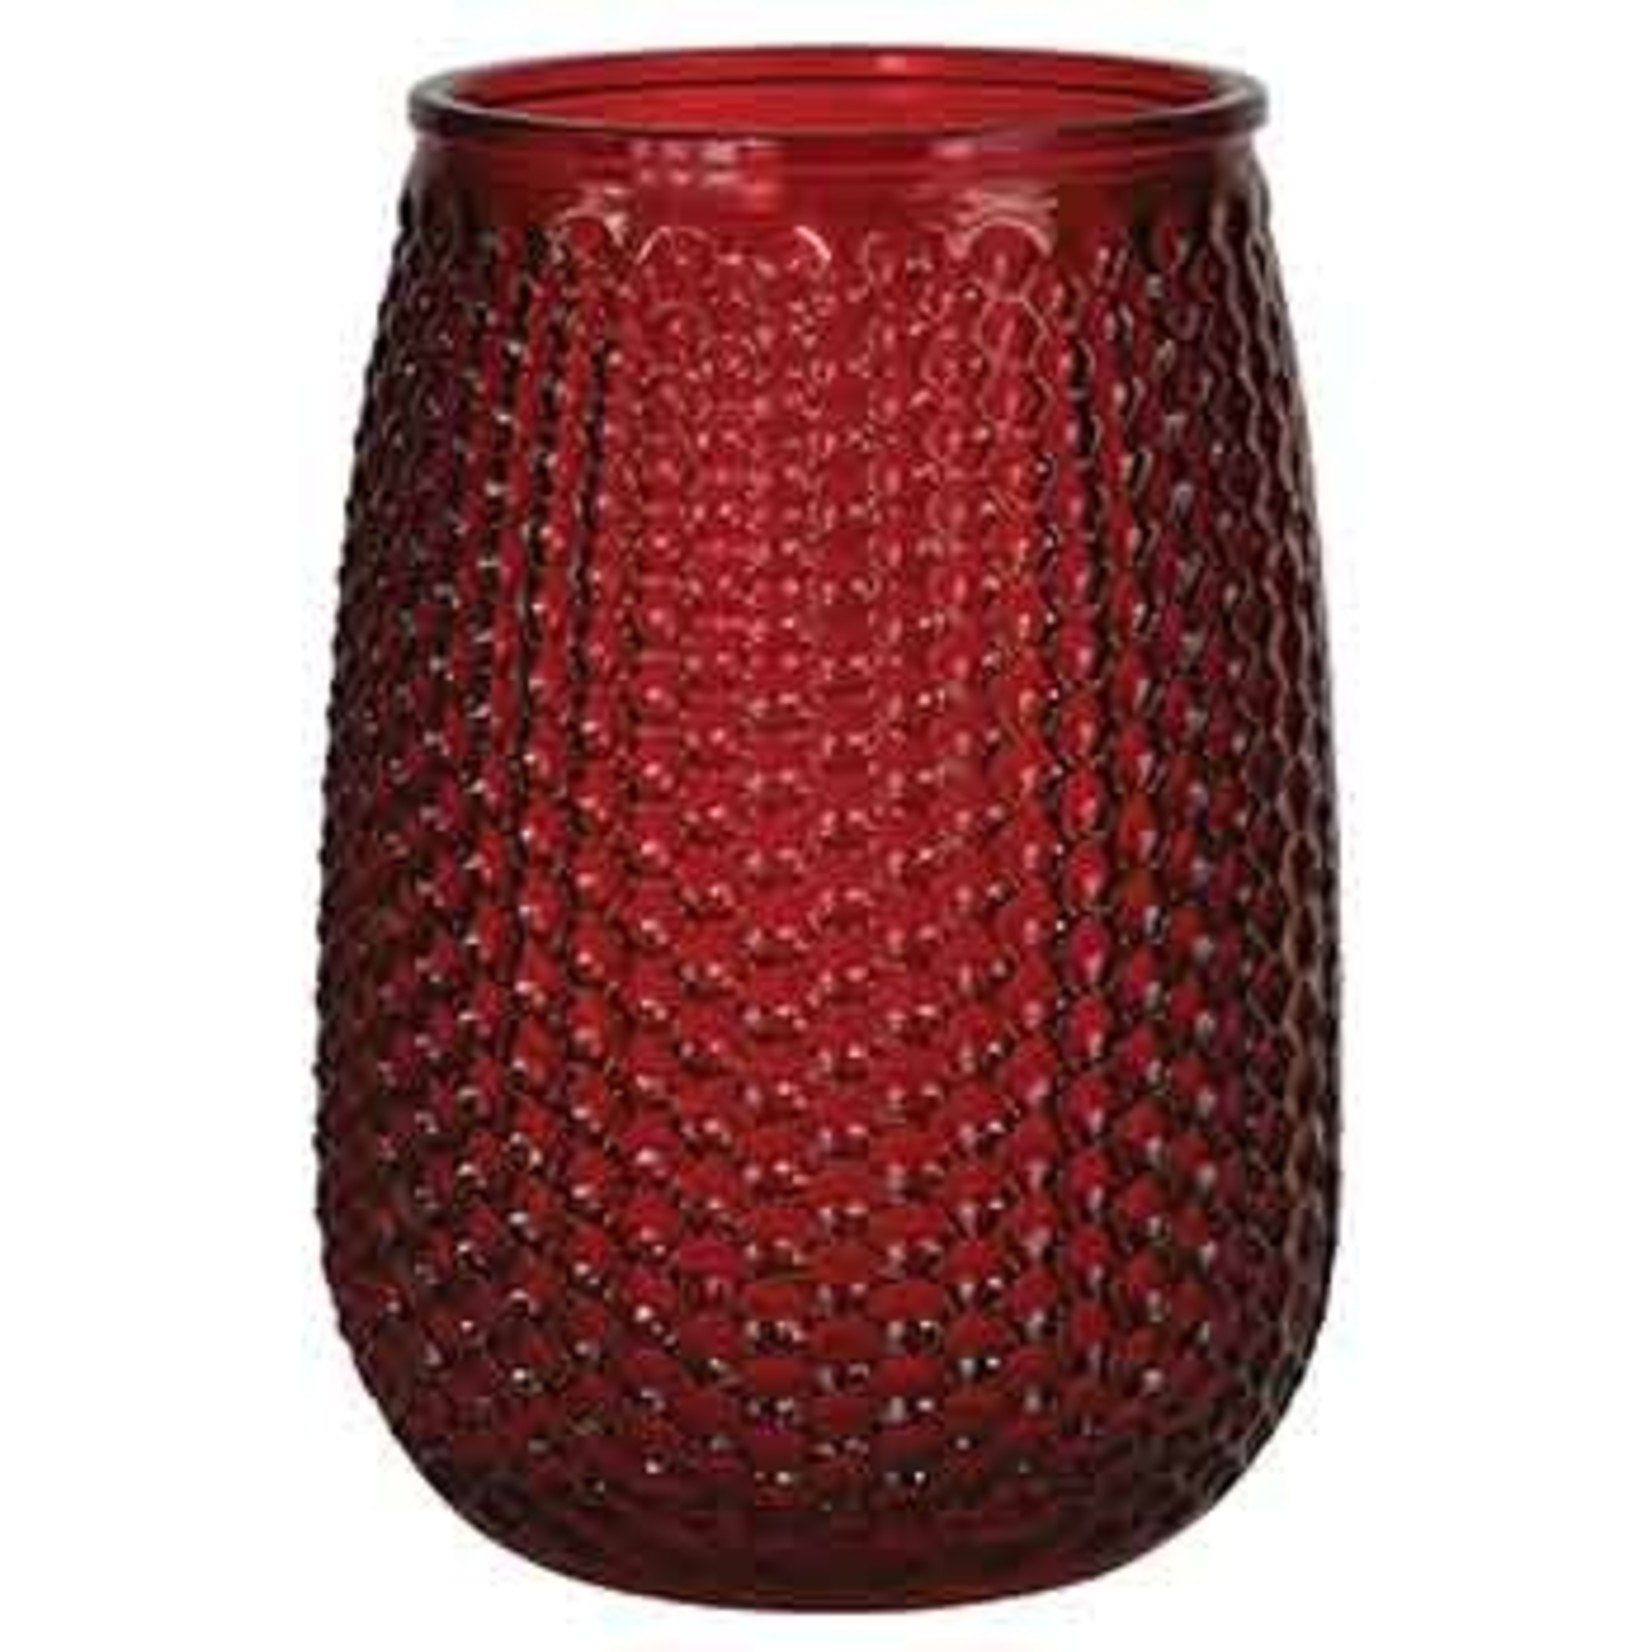 7.75"h x 4" RED DIMPLE GLASS VASE